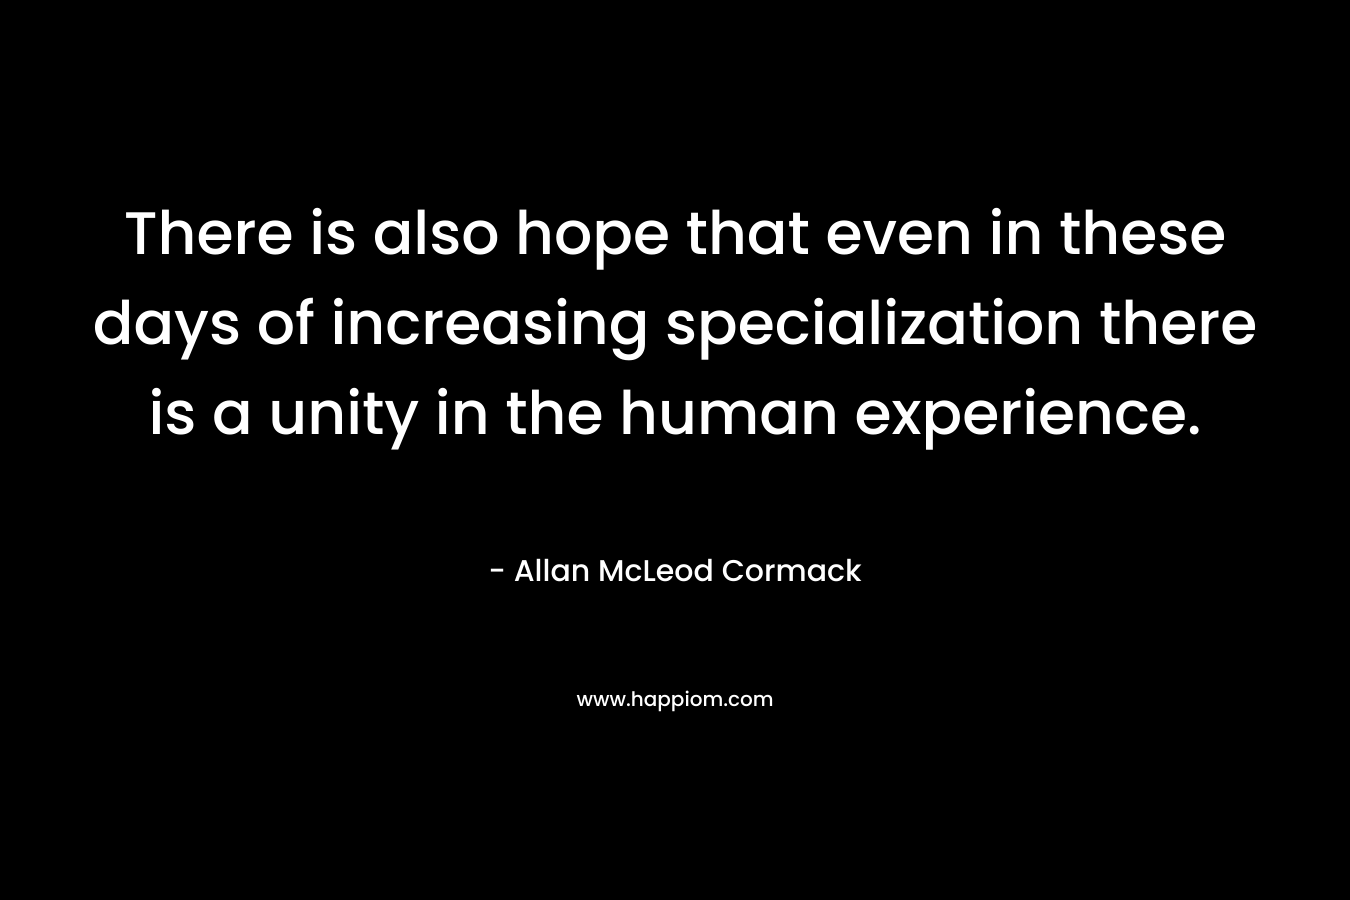 There is also hope that even in these days of increasing specialization there is a unity in the human experience.